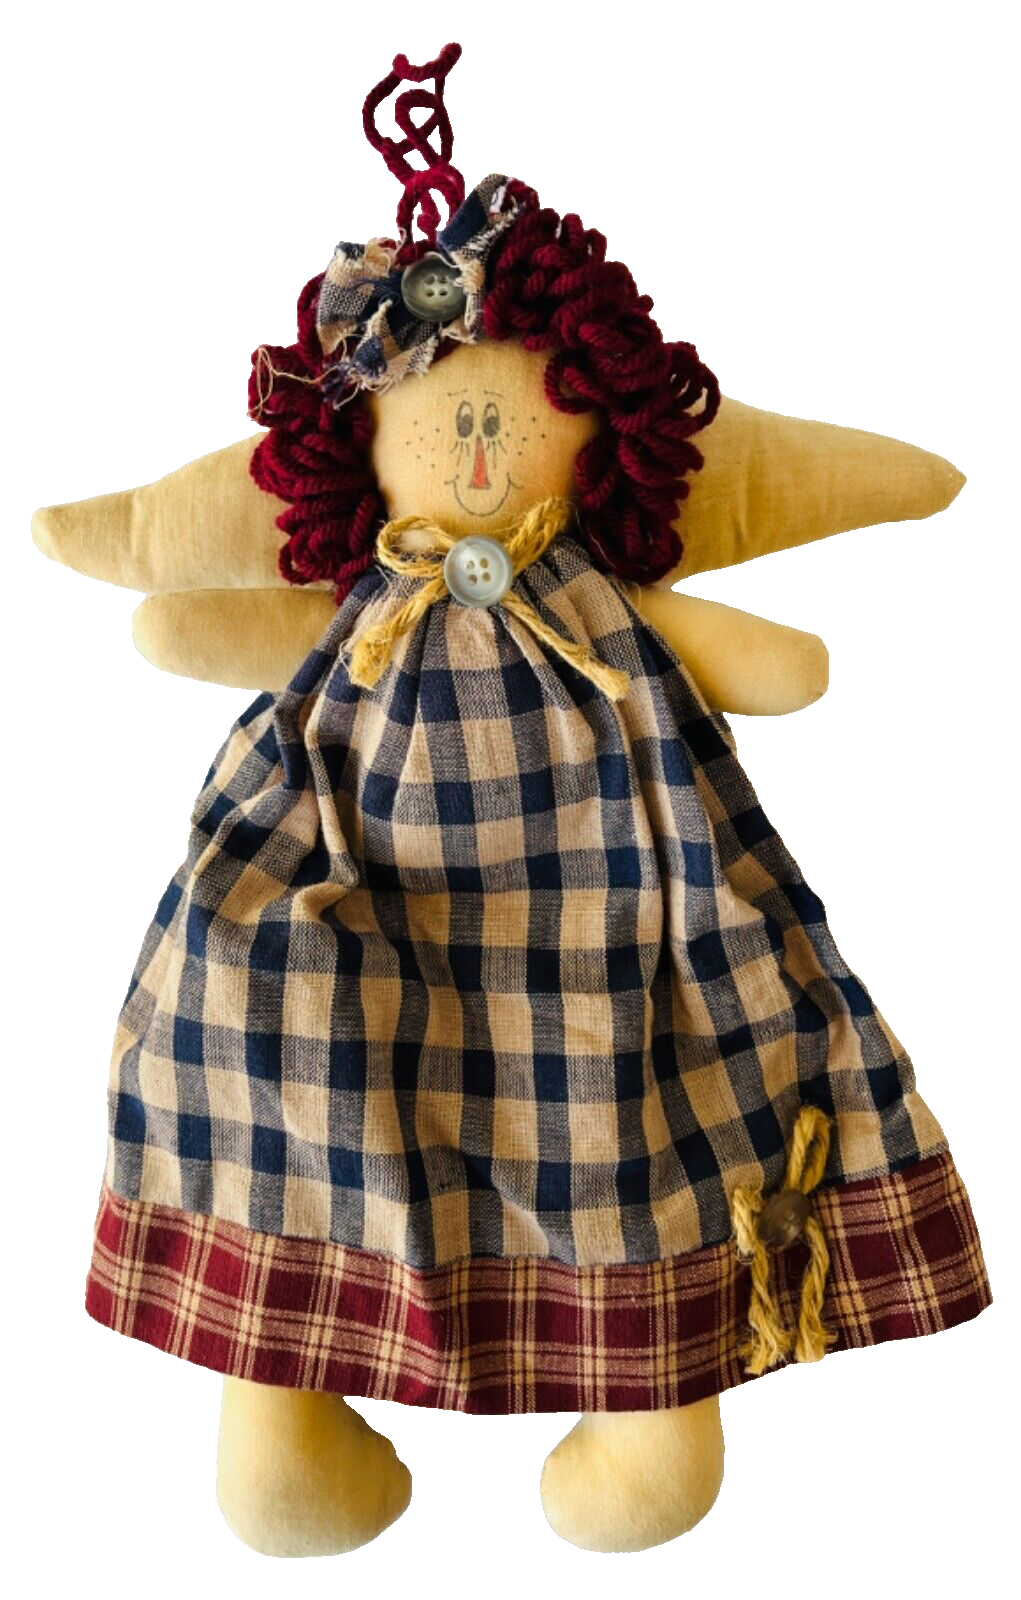 Primary image for Primitive Folk Art Angel Doll Raggedy Ann Face Homespun Dress Buttons Bows 12.5"